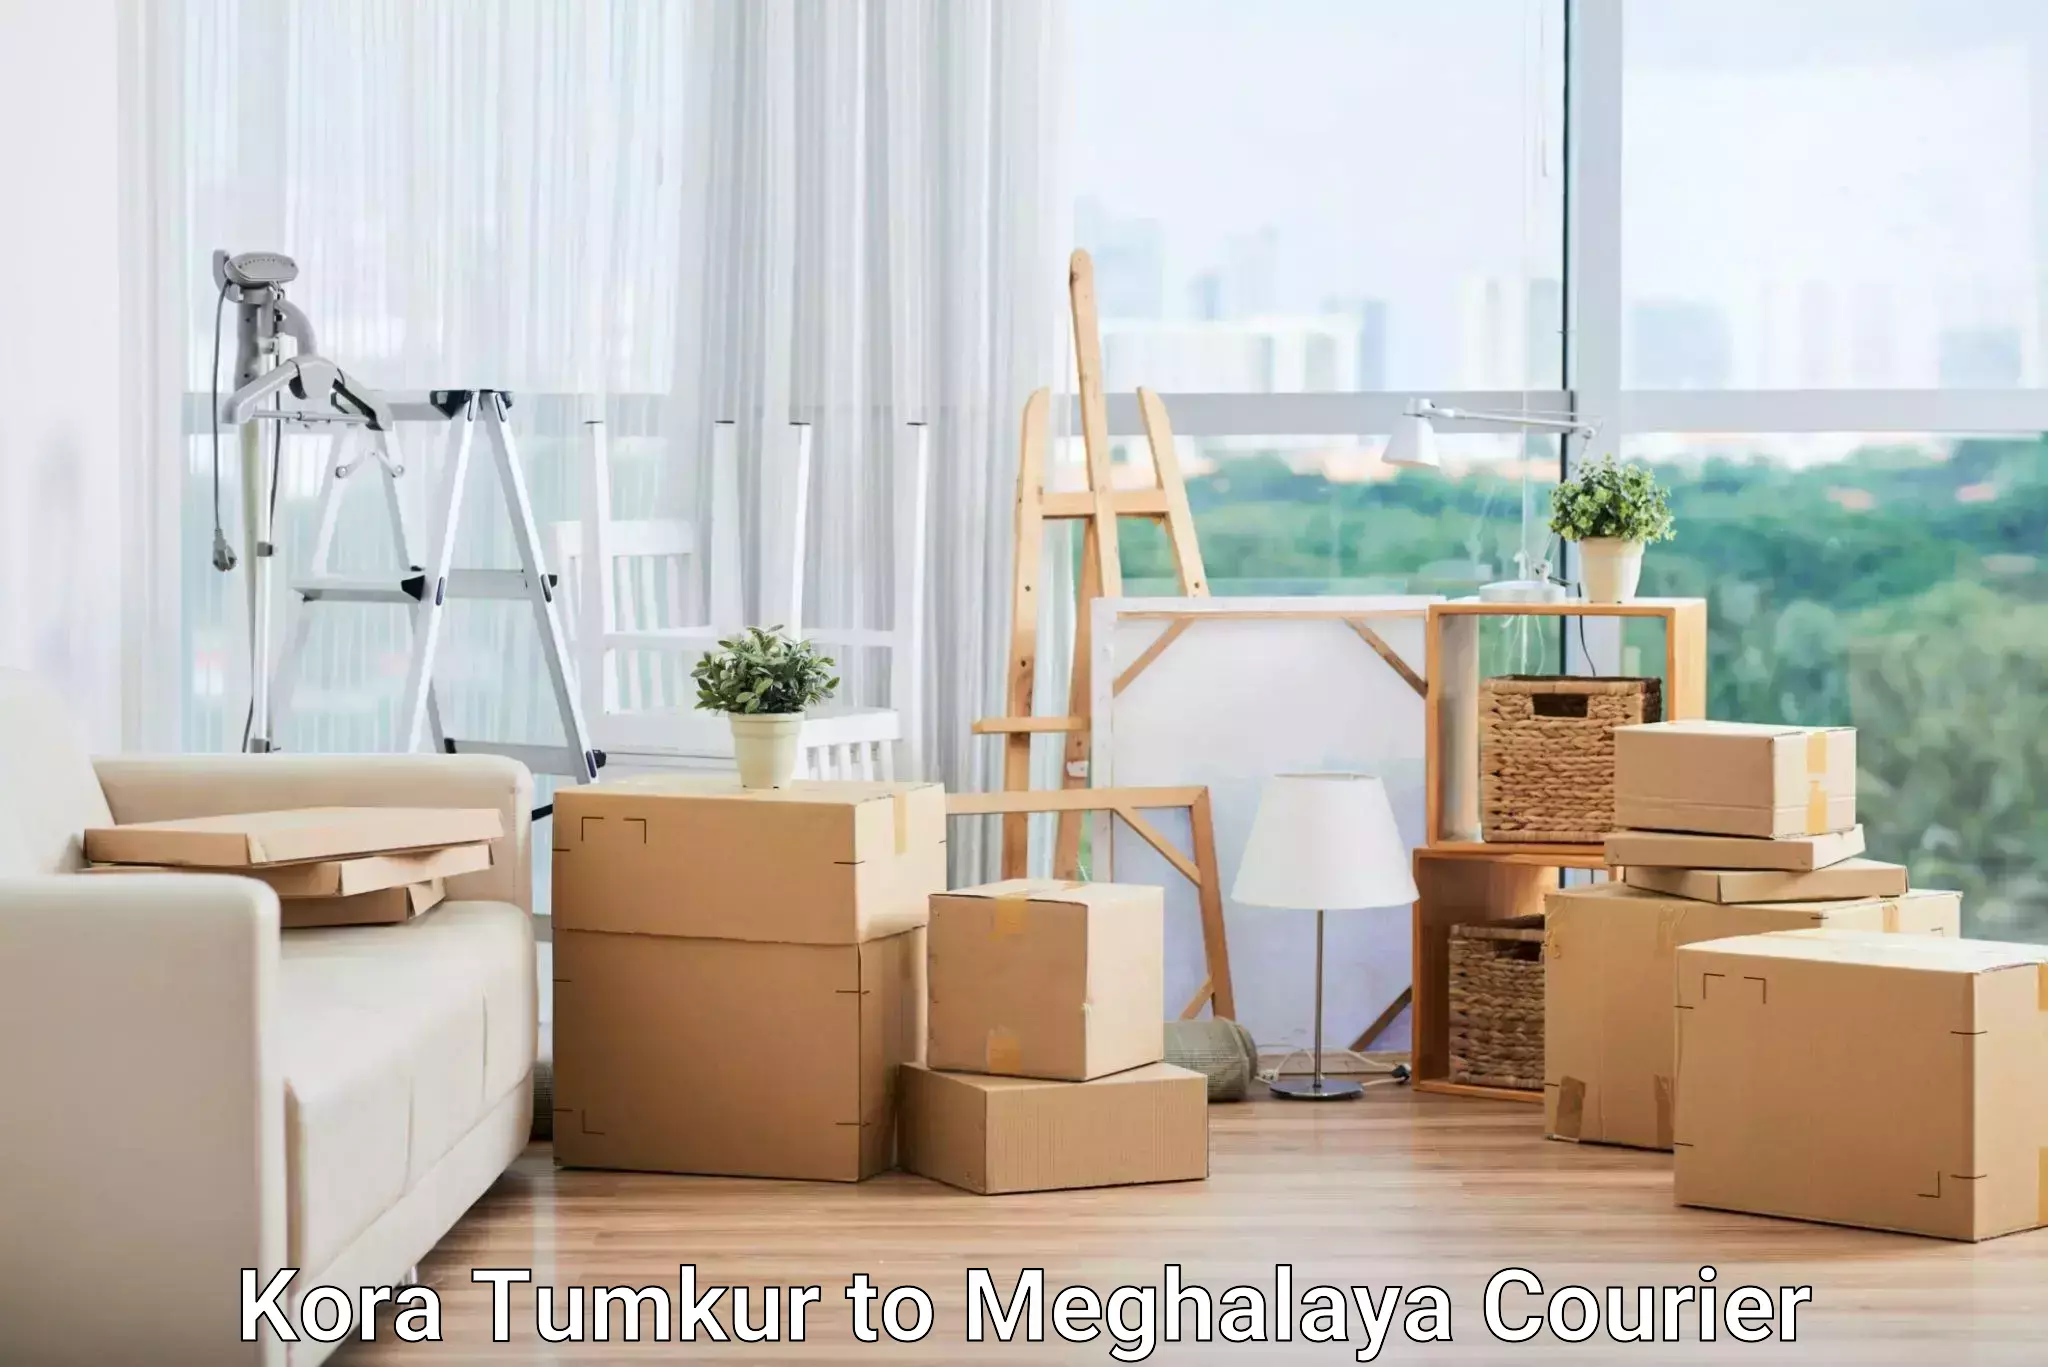 Professional courier services Kora Tumkur to Shillong